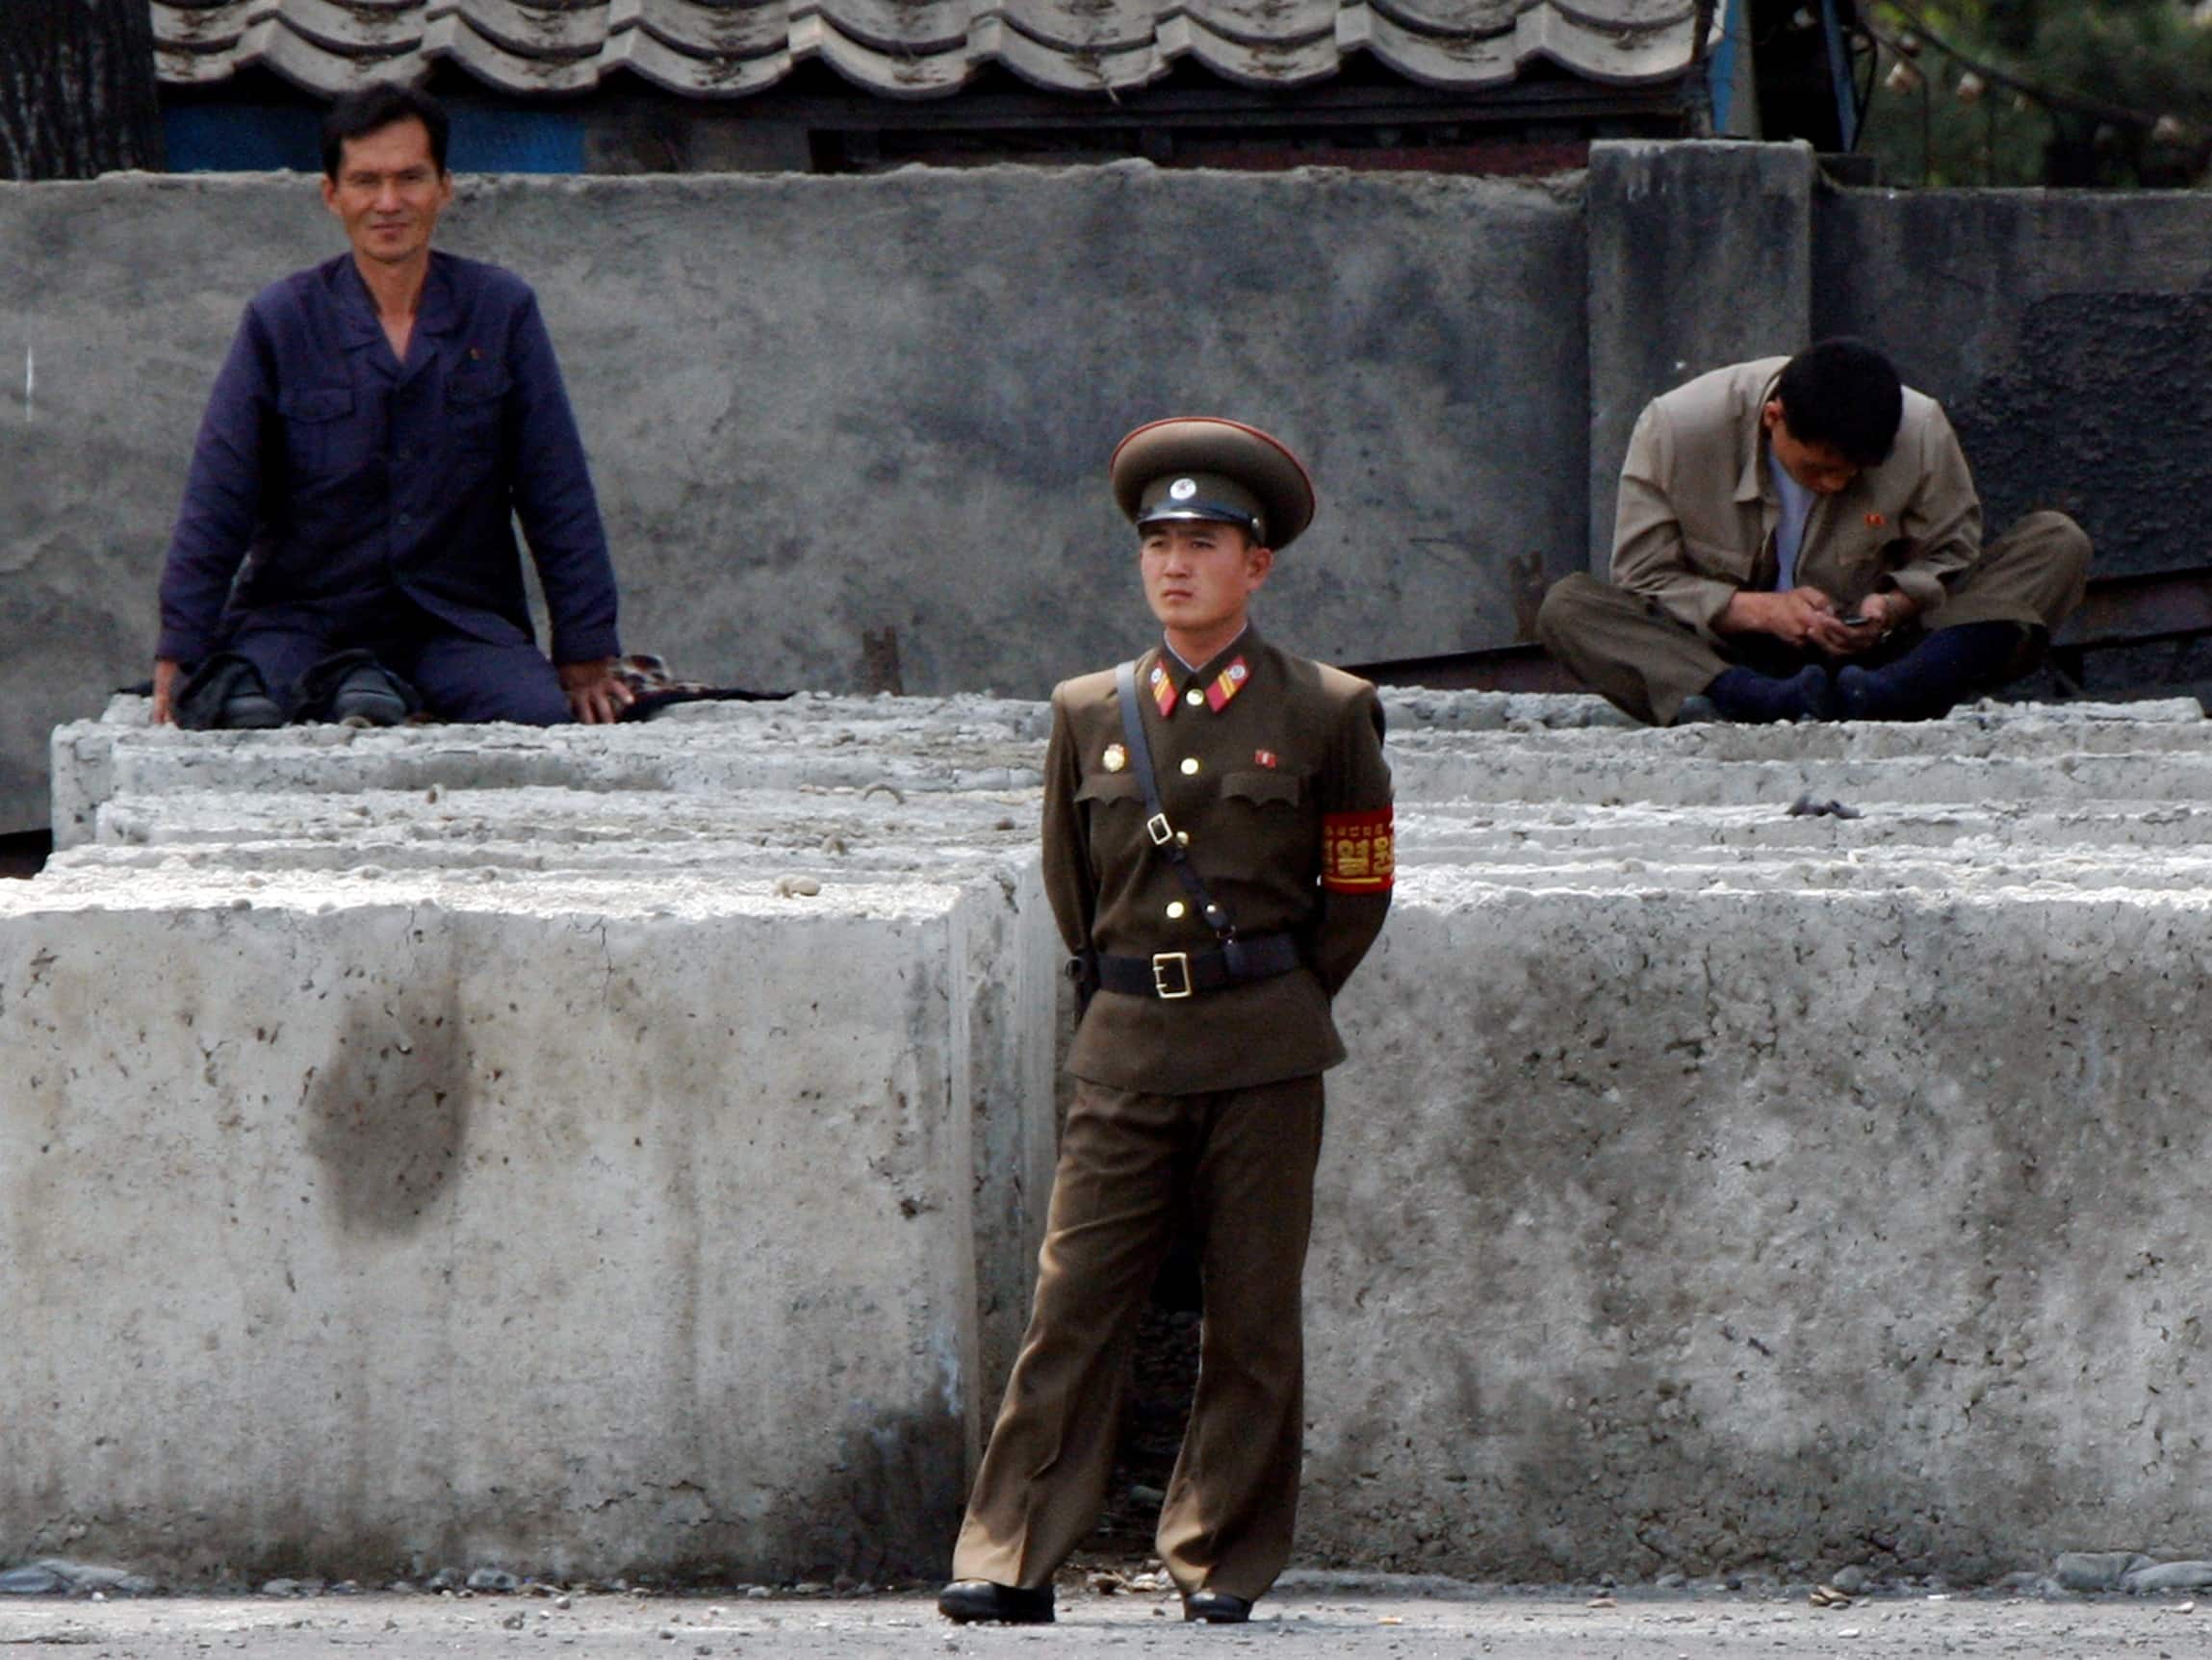 A North Korean worker checks his mobile phone as a soldier stands in front along the banks of Yalu River, 7 June 2013; using a mobile phone remains risky, as information that someone was seen doing this can be enough to spark an investigation, arrest, and abuse in detention, REUTERS/Jacky Chen